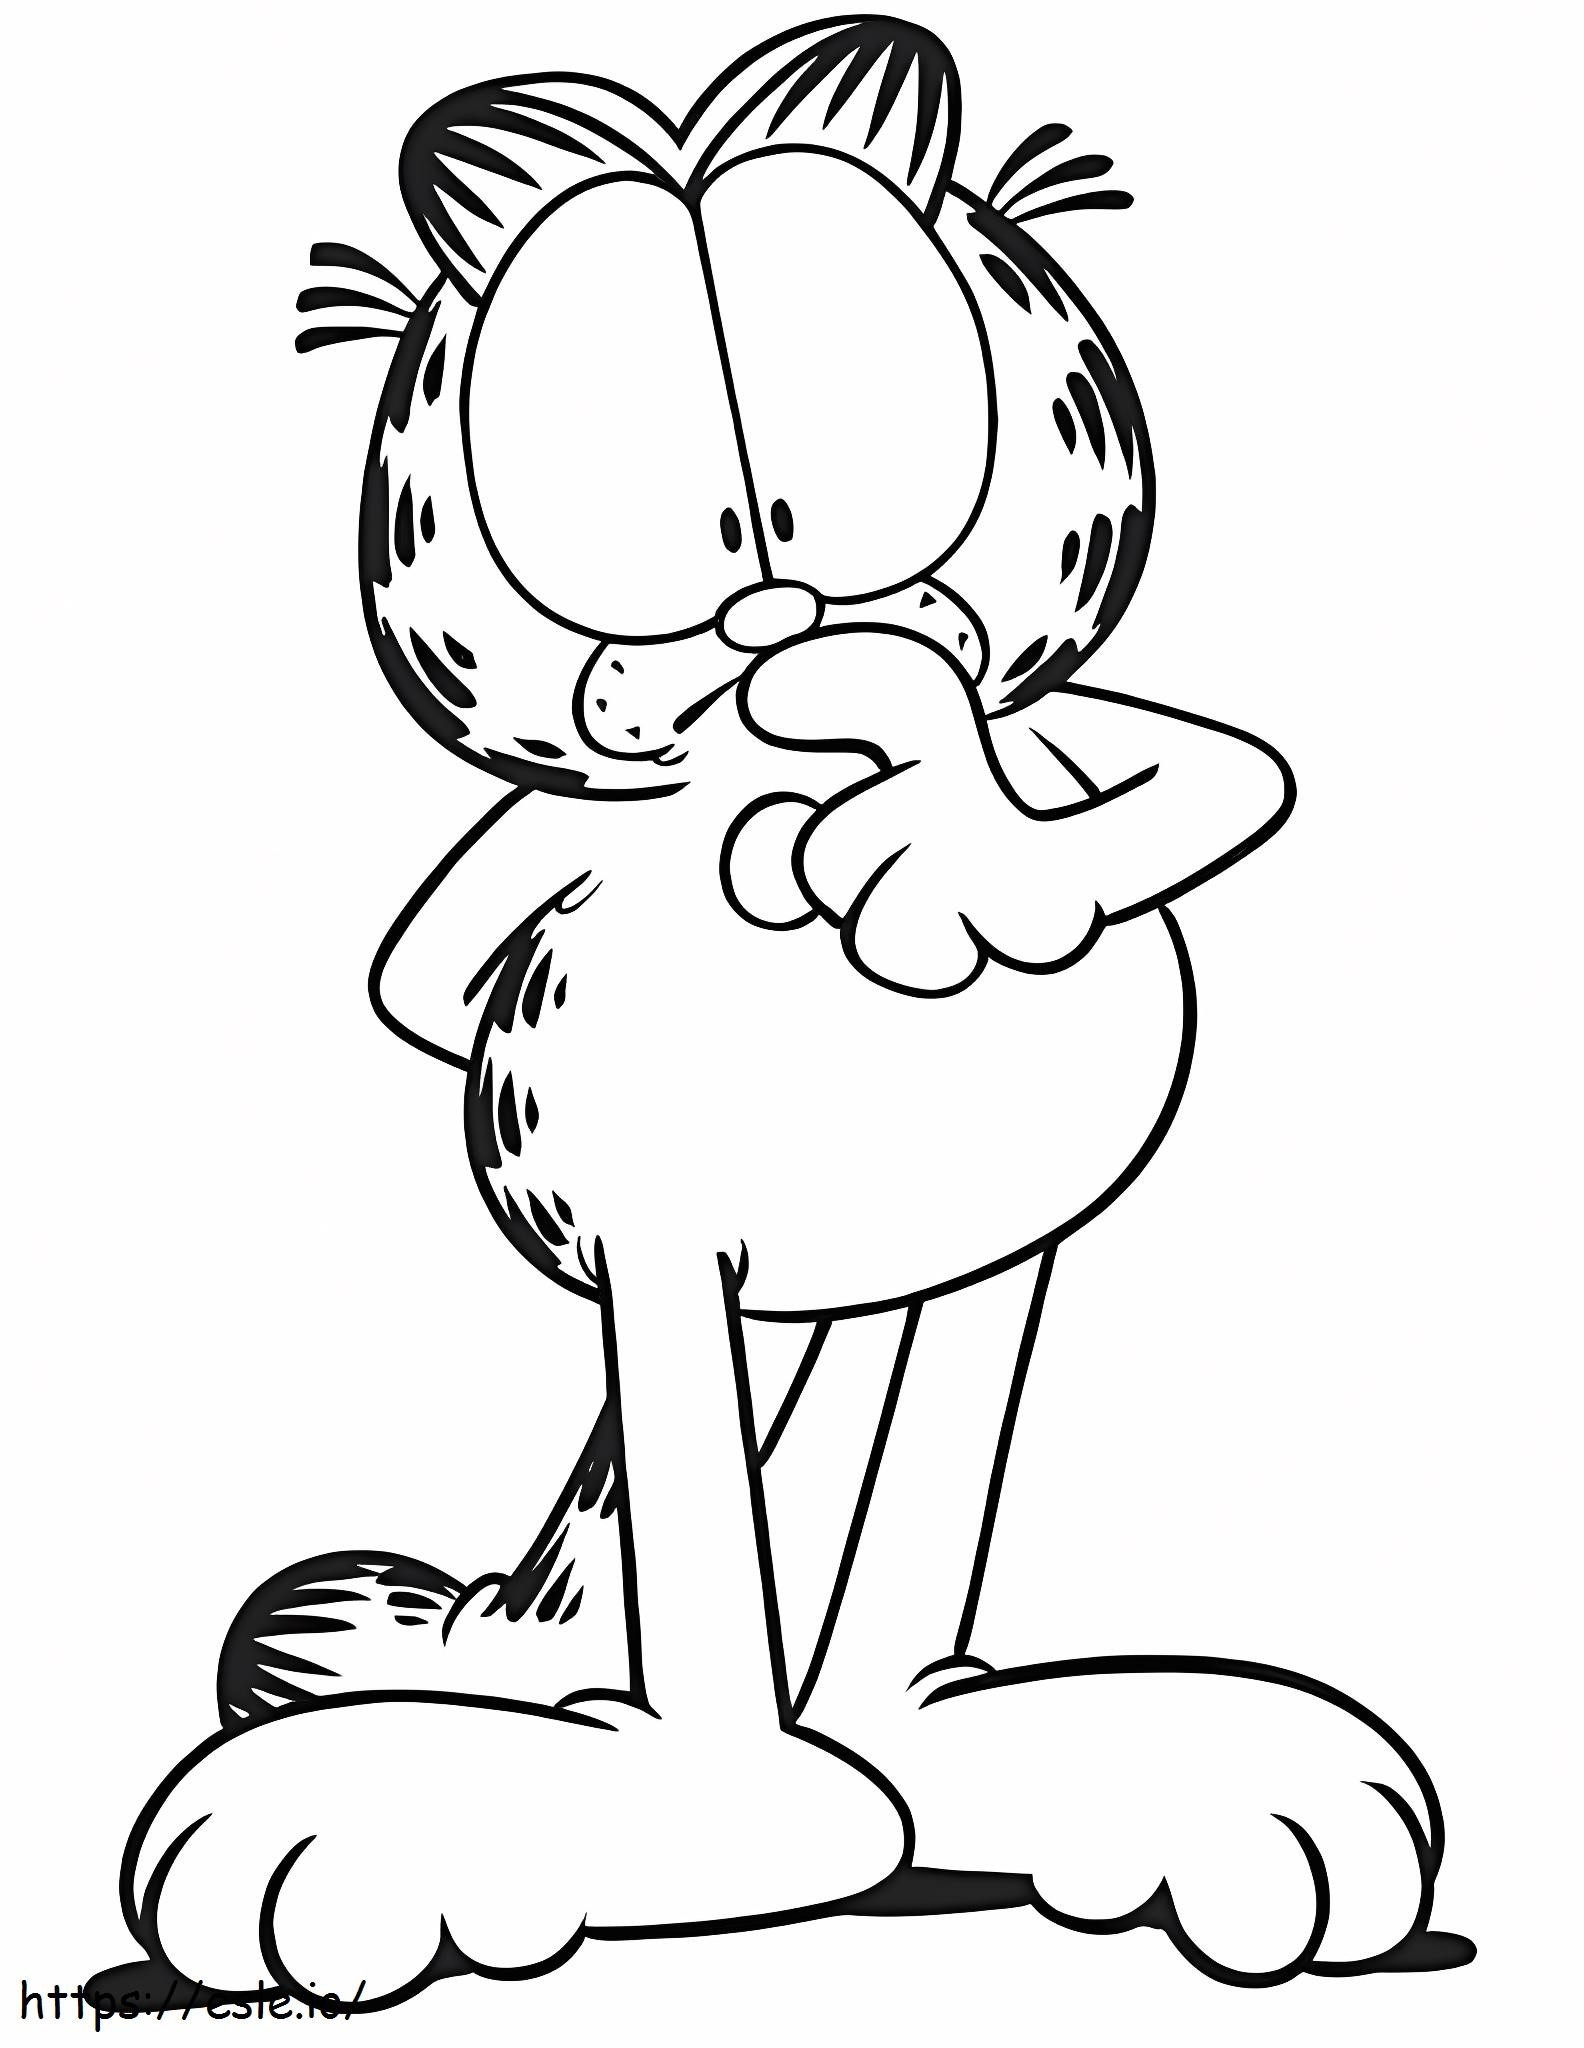 Garfield Thought coloring page